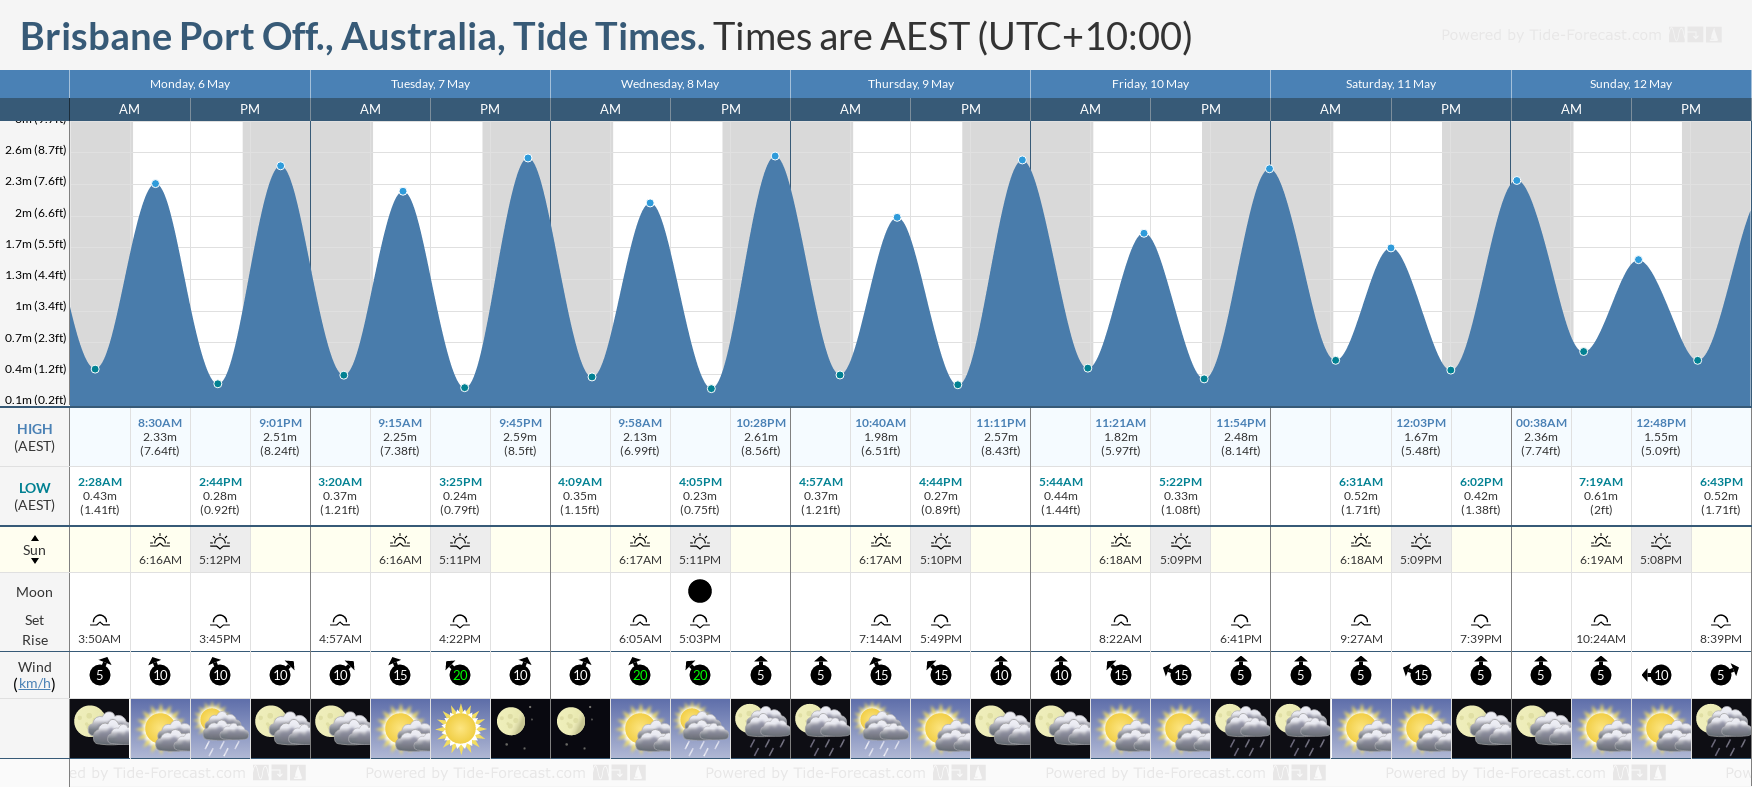 Brisbane Port Off., Australia Tide Chart including high and low tide tide times for the next 7 days